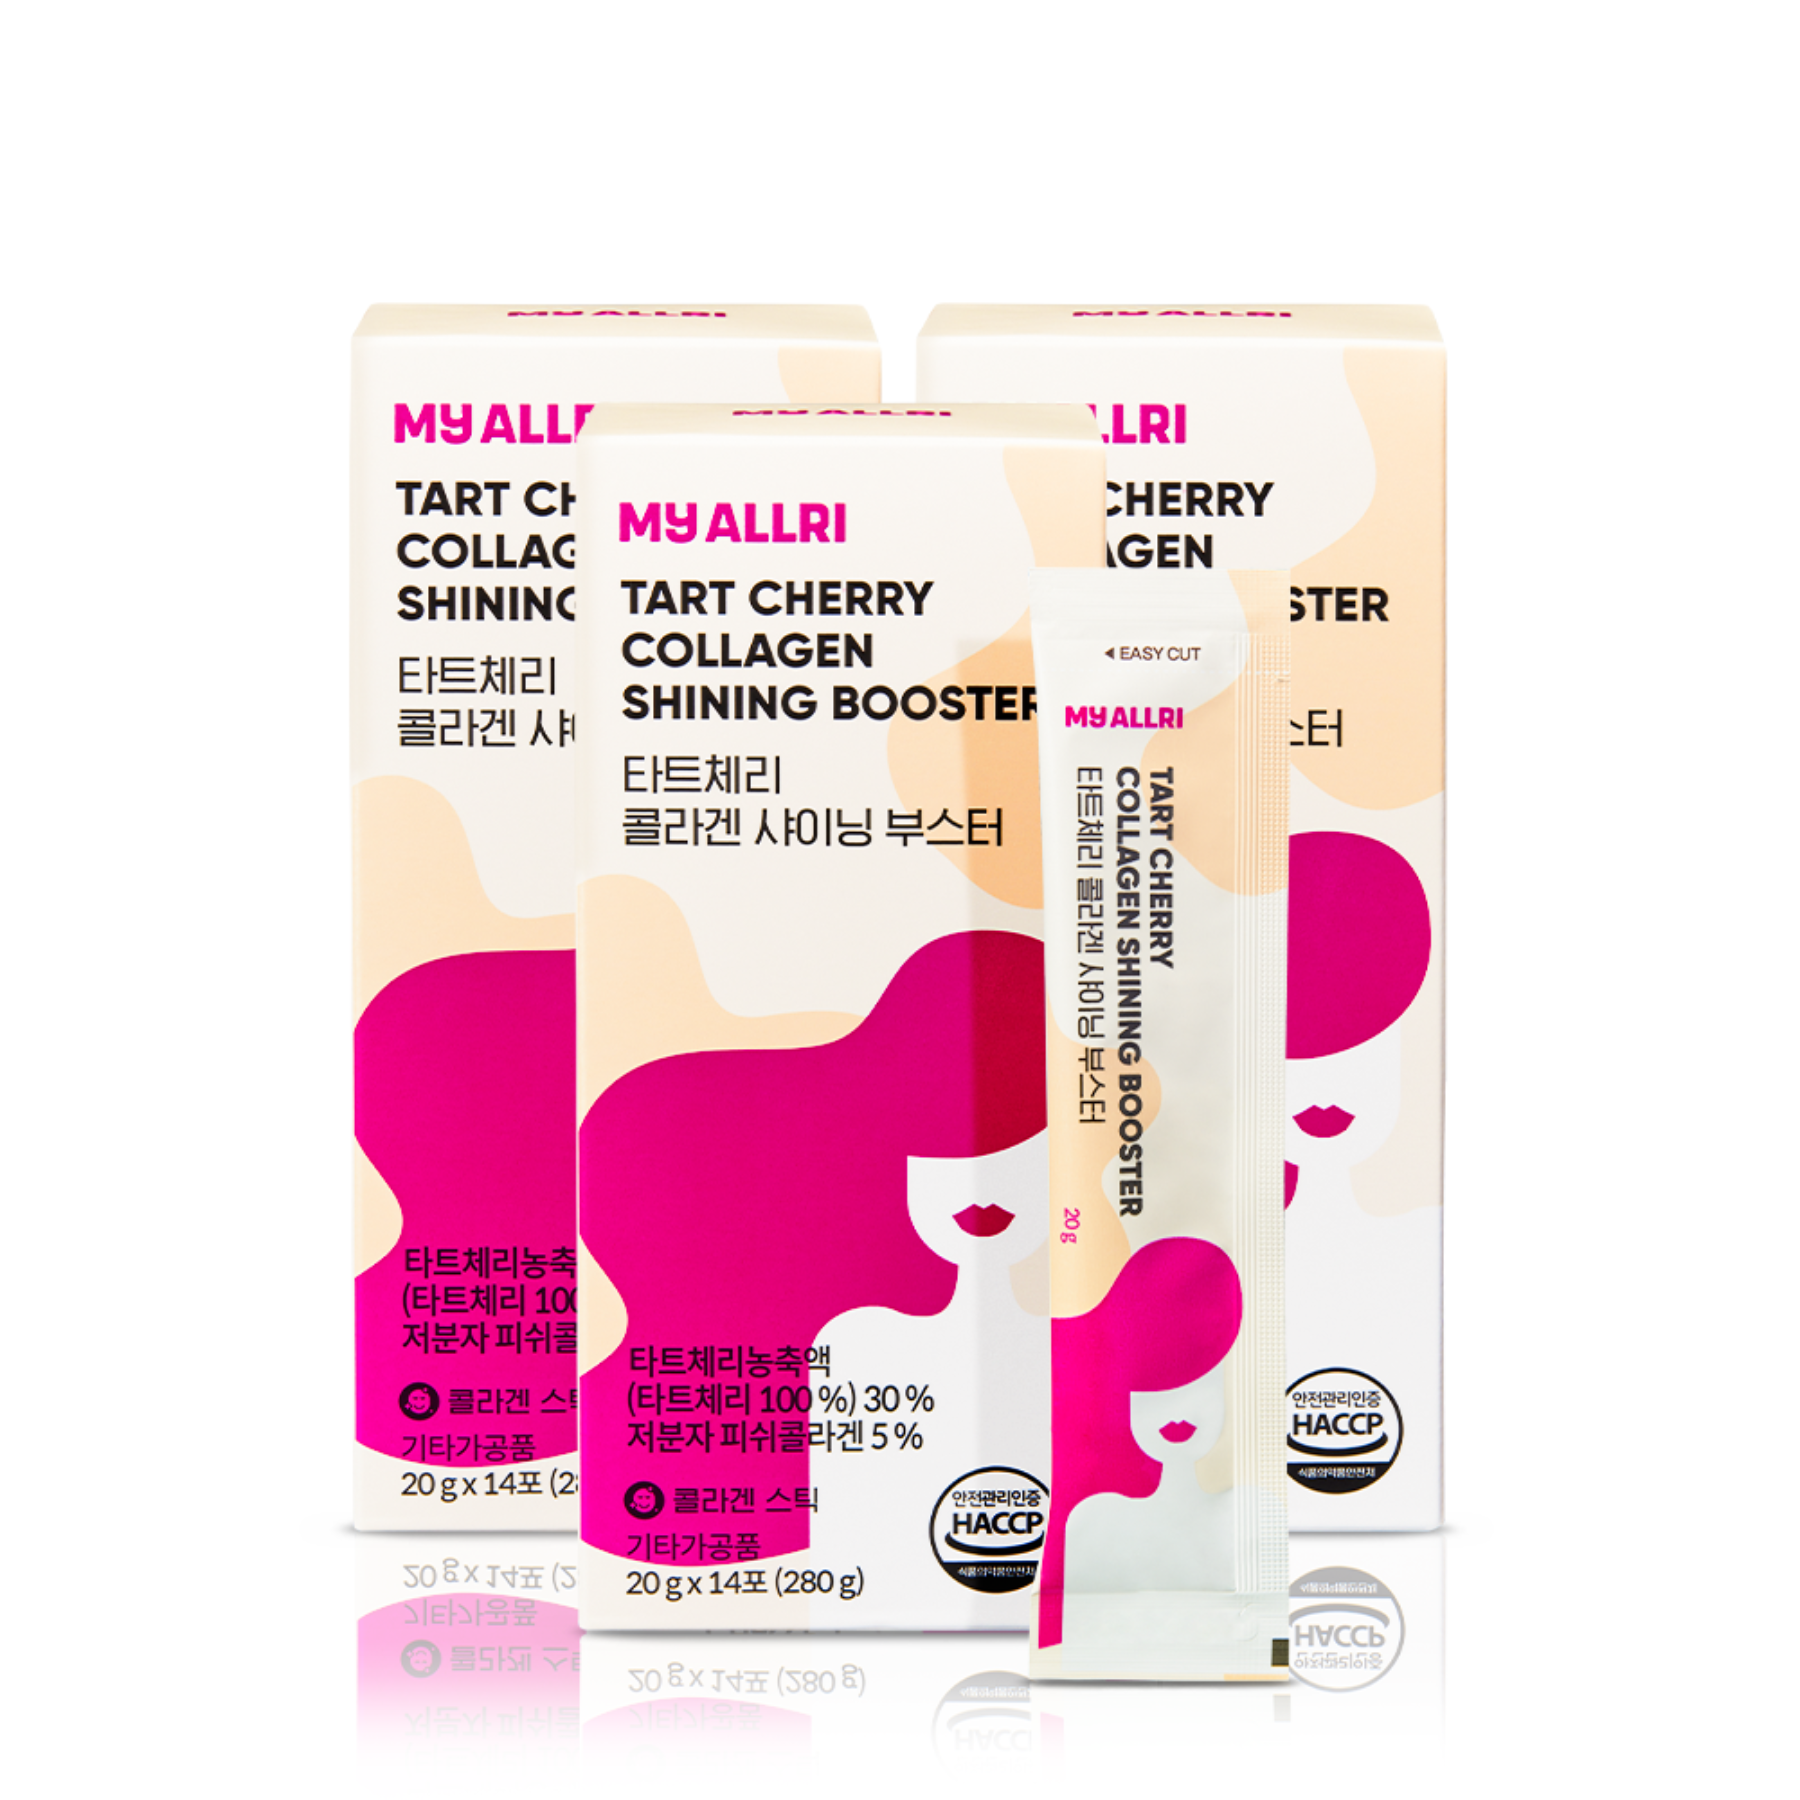 Tatcherry Collagen Shining Booster 3 boxes (42 bags)